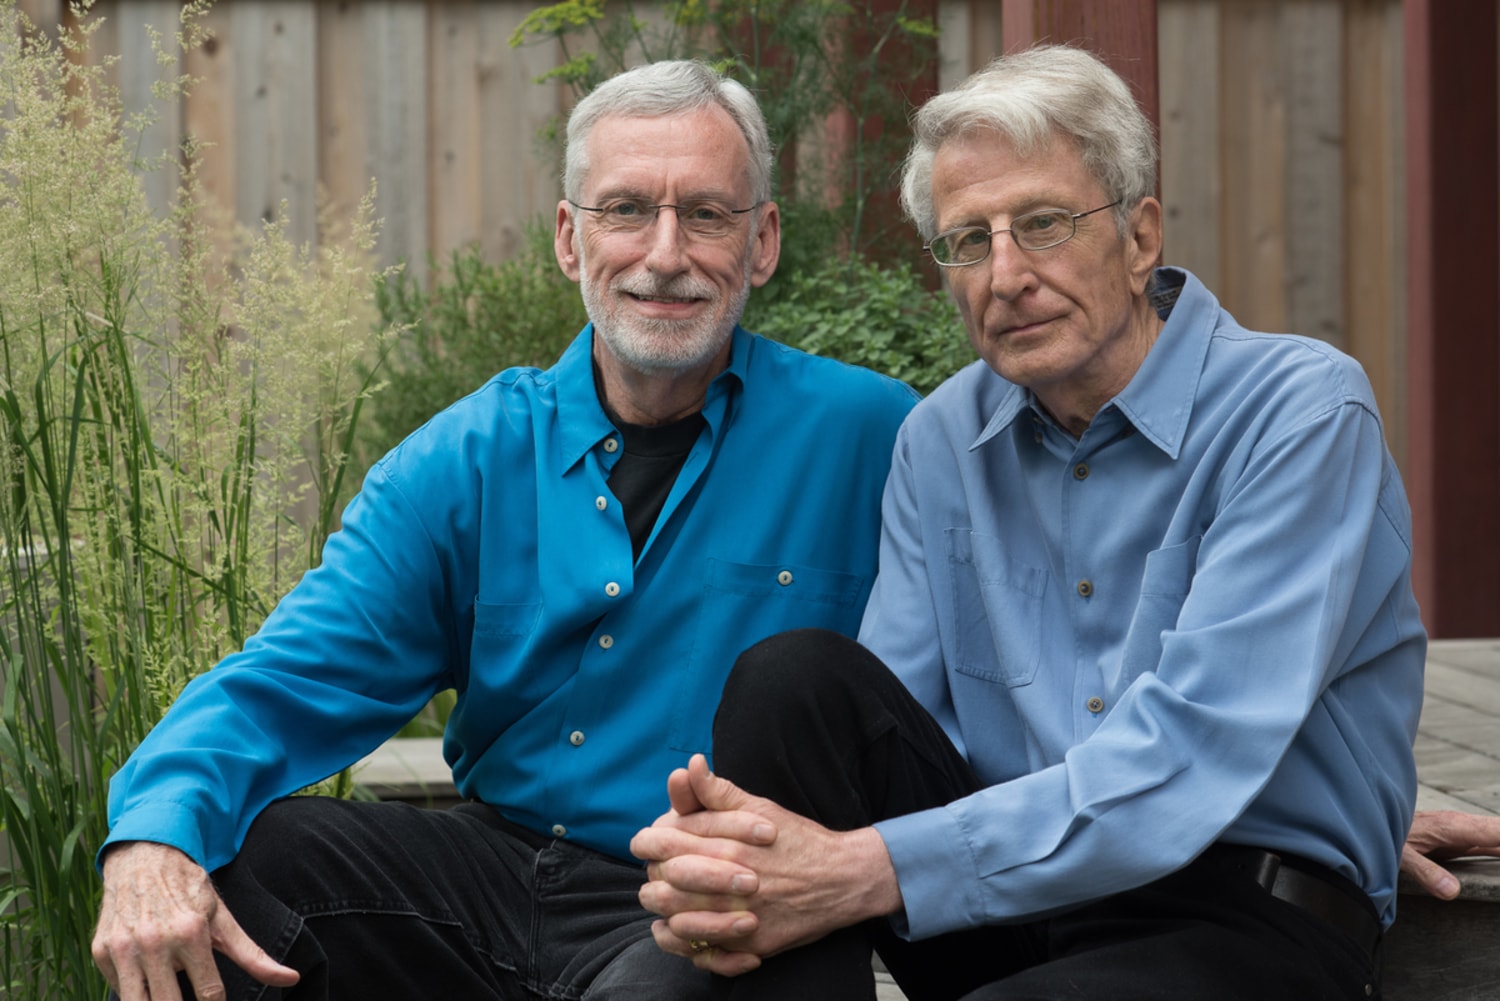 After decades-long legal battle, gay couples 1971 marriage officially recognized pic photo